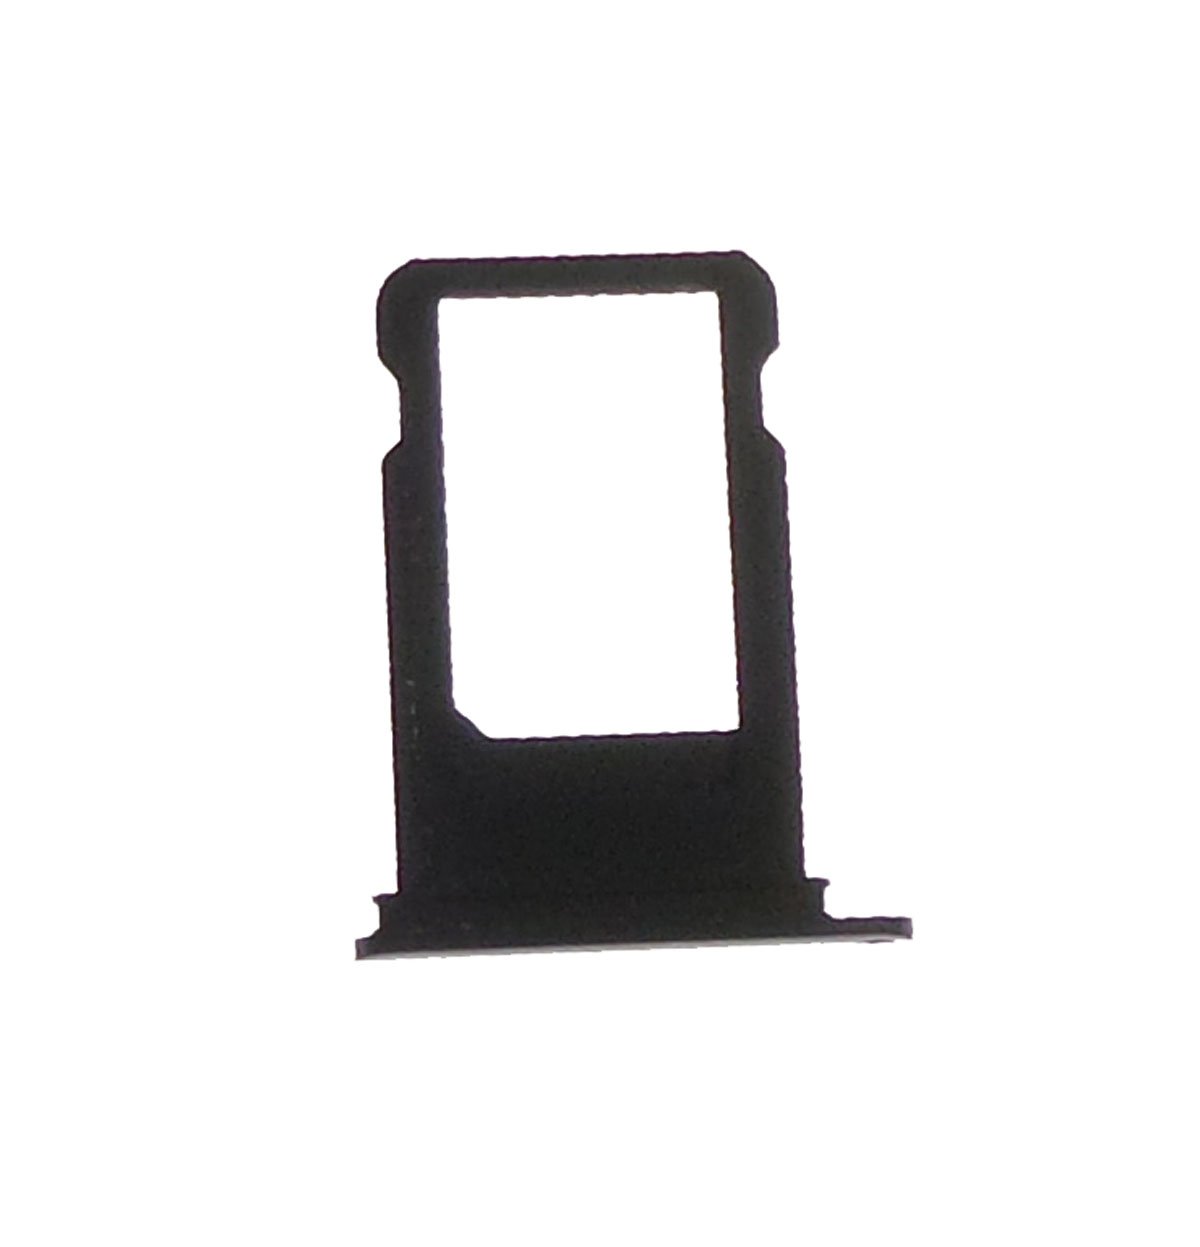 SIM tray black for Apple iPhone 7 more